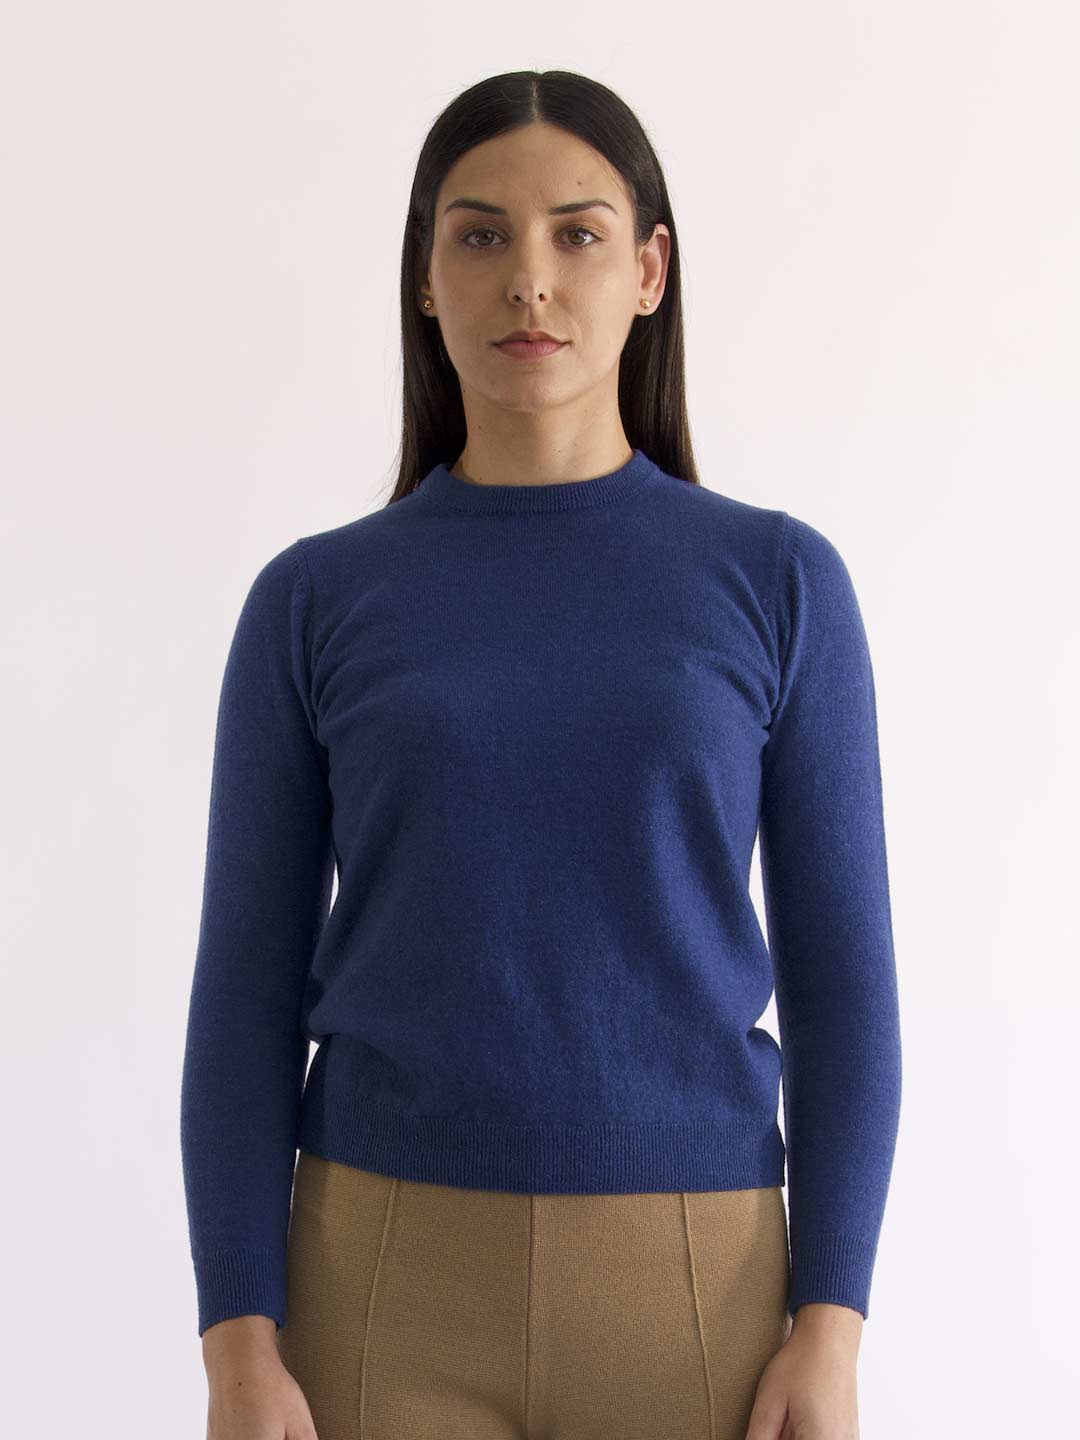 Low Neck Blouse in Lambswool